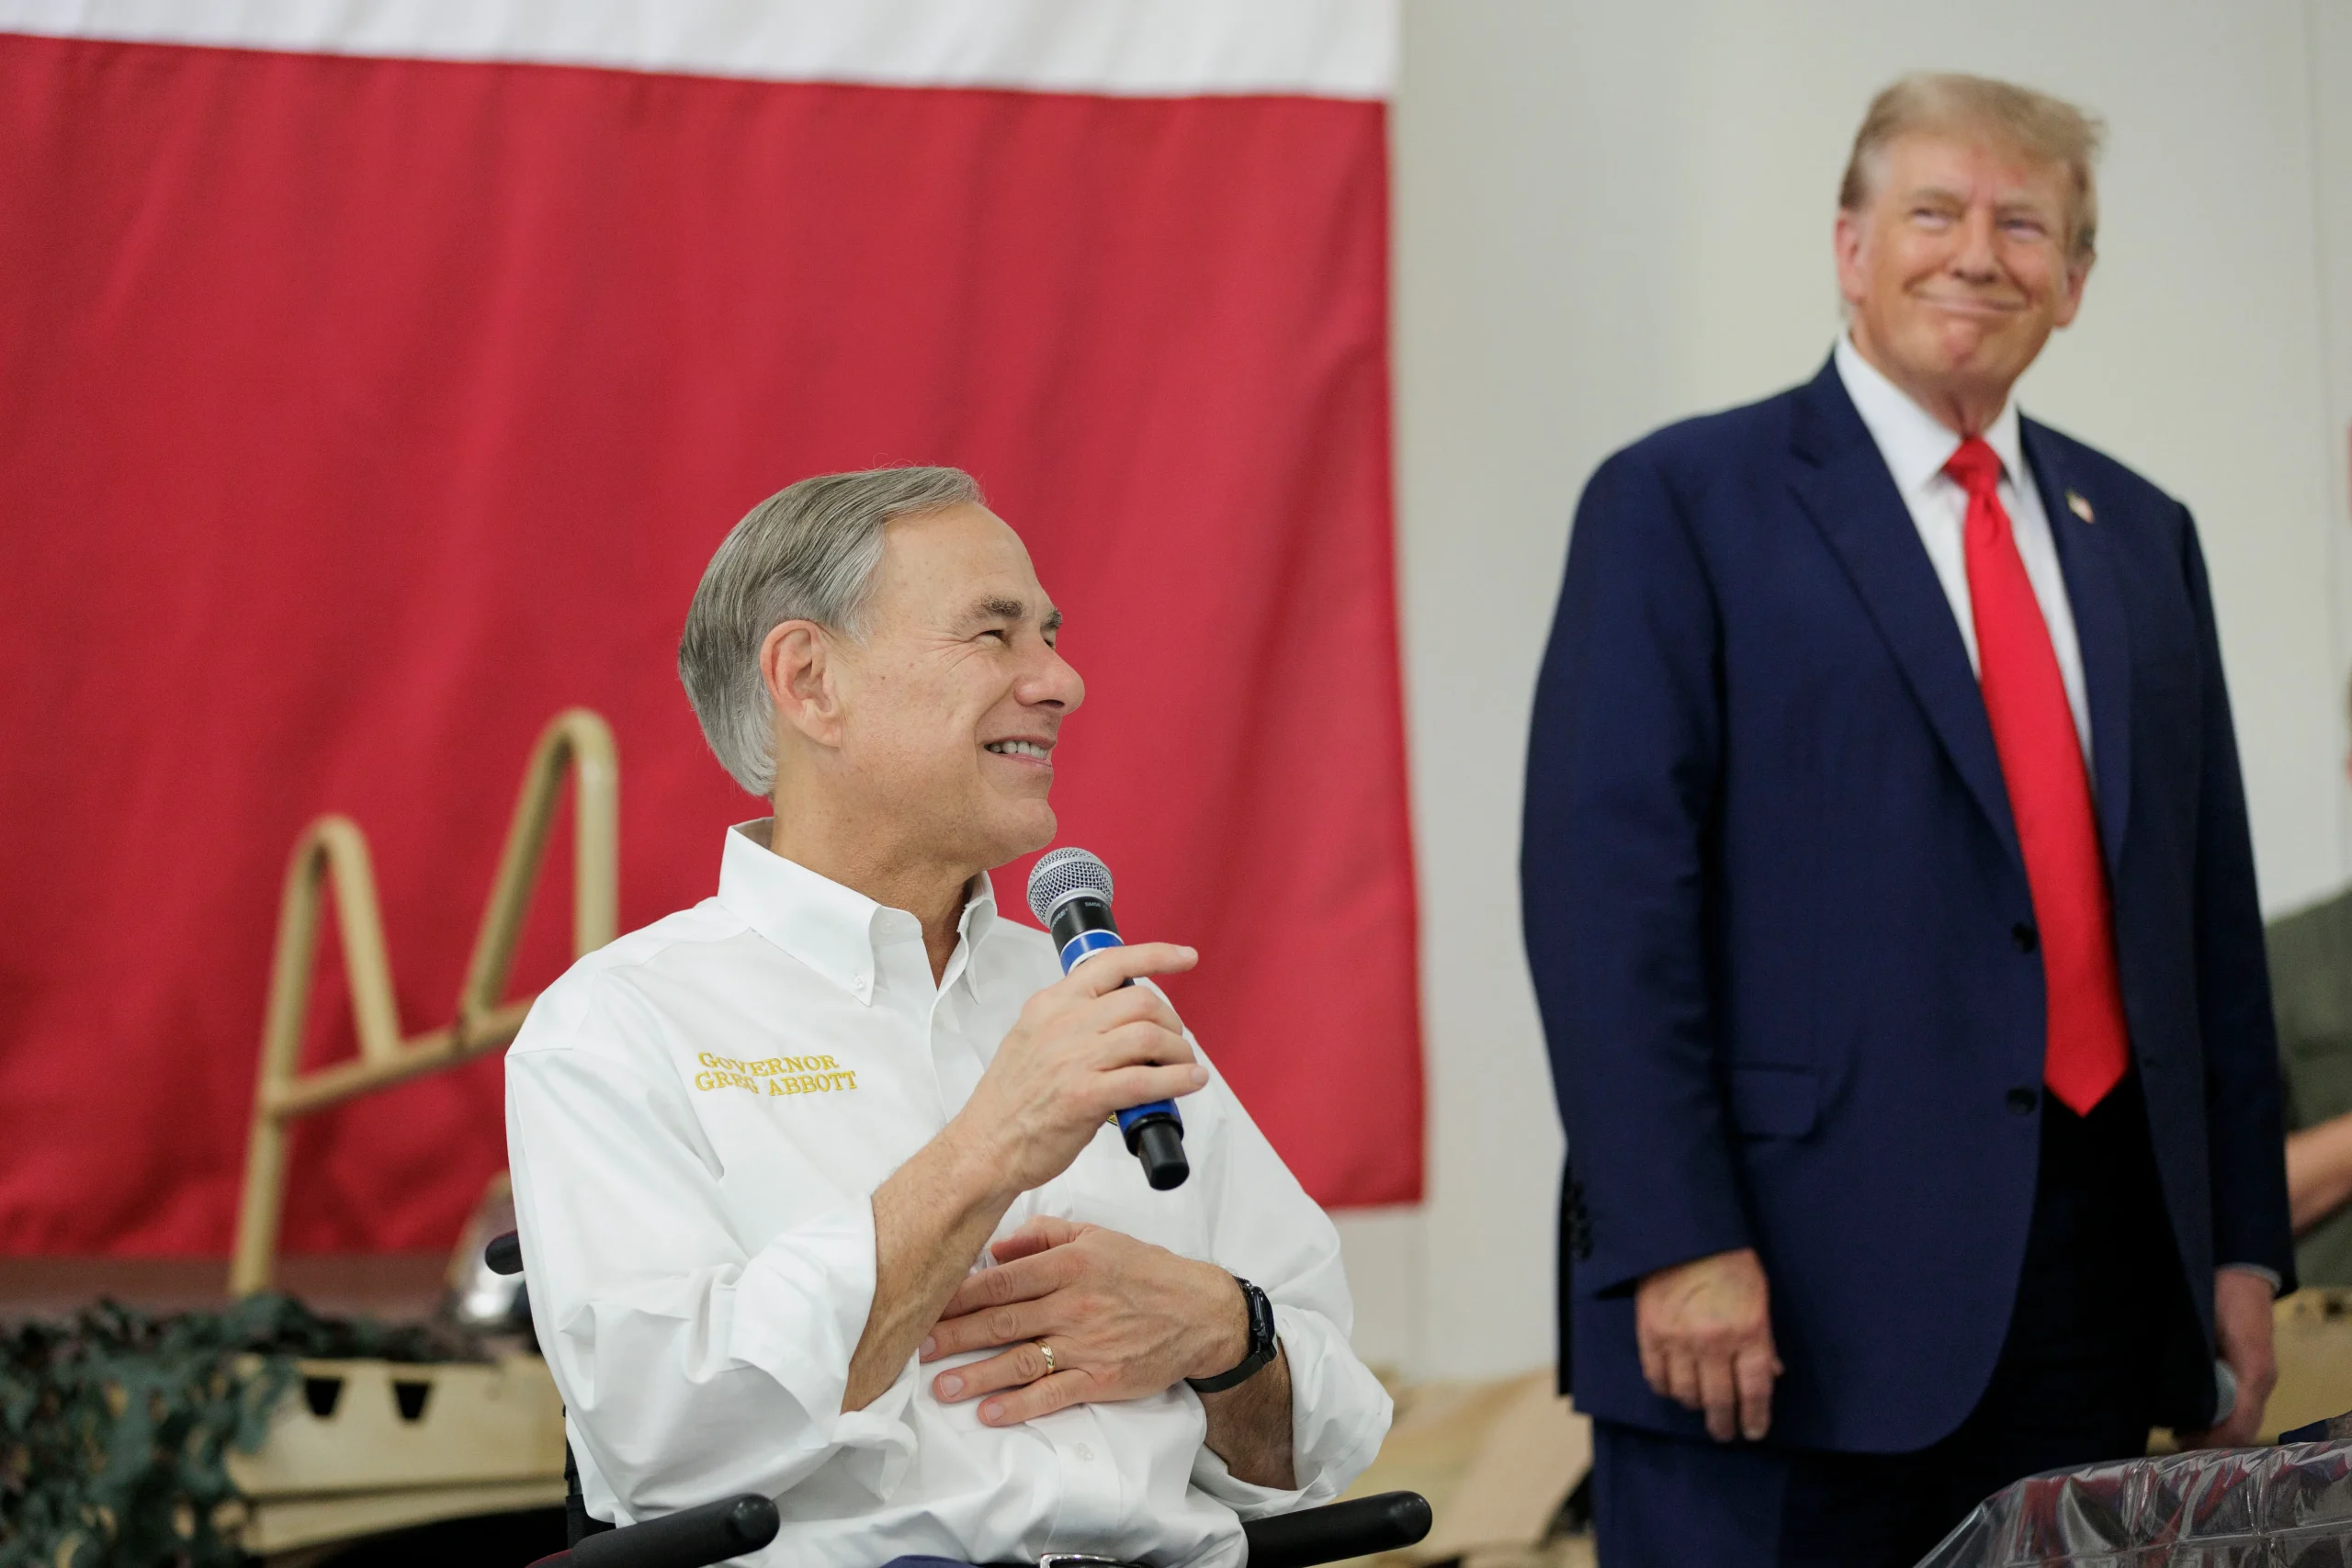 Texas Republicans Face Tough Challenges in Education-Focused Runoff